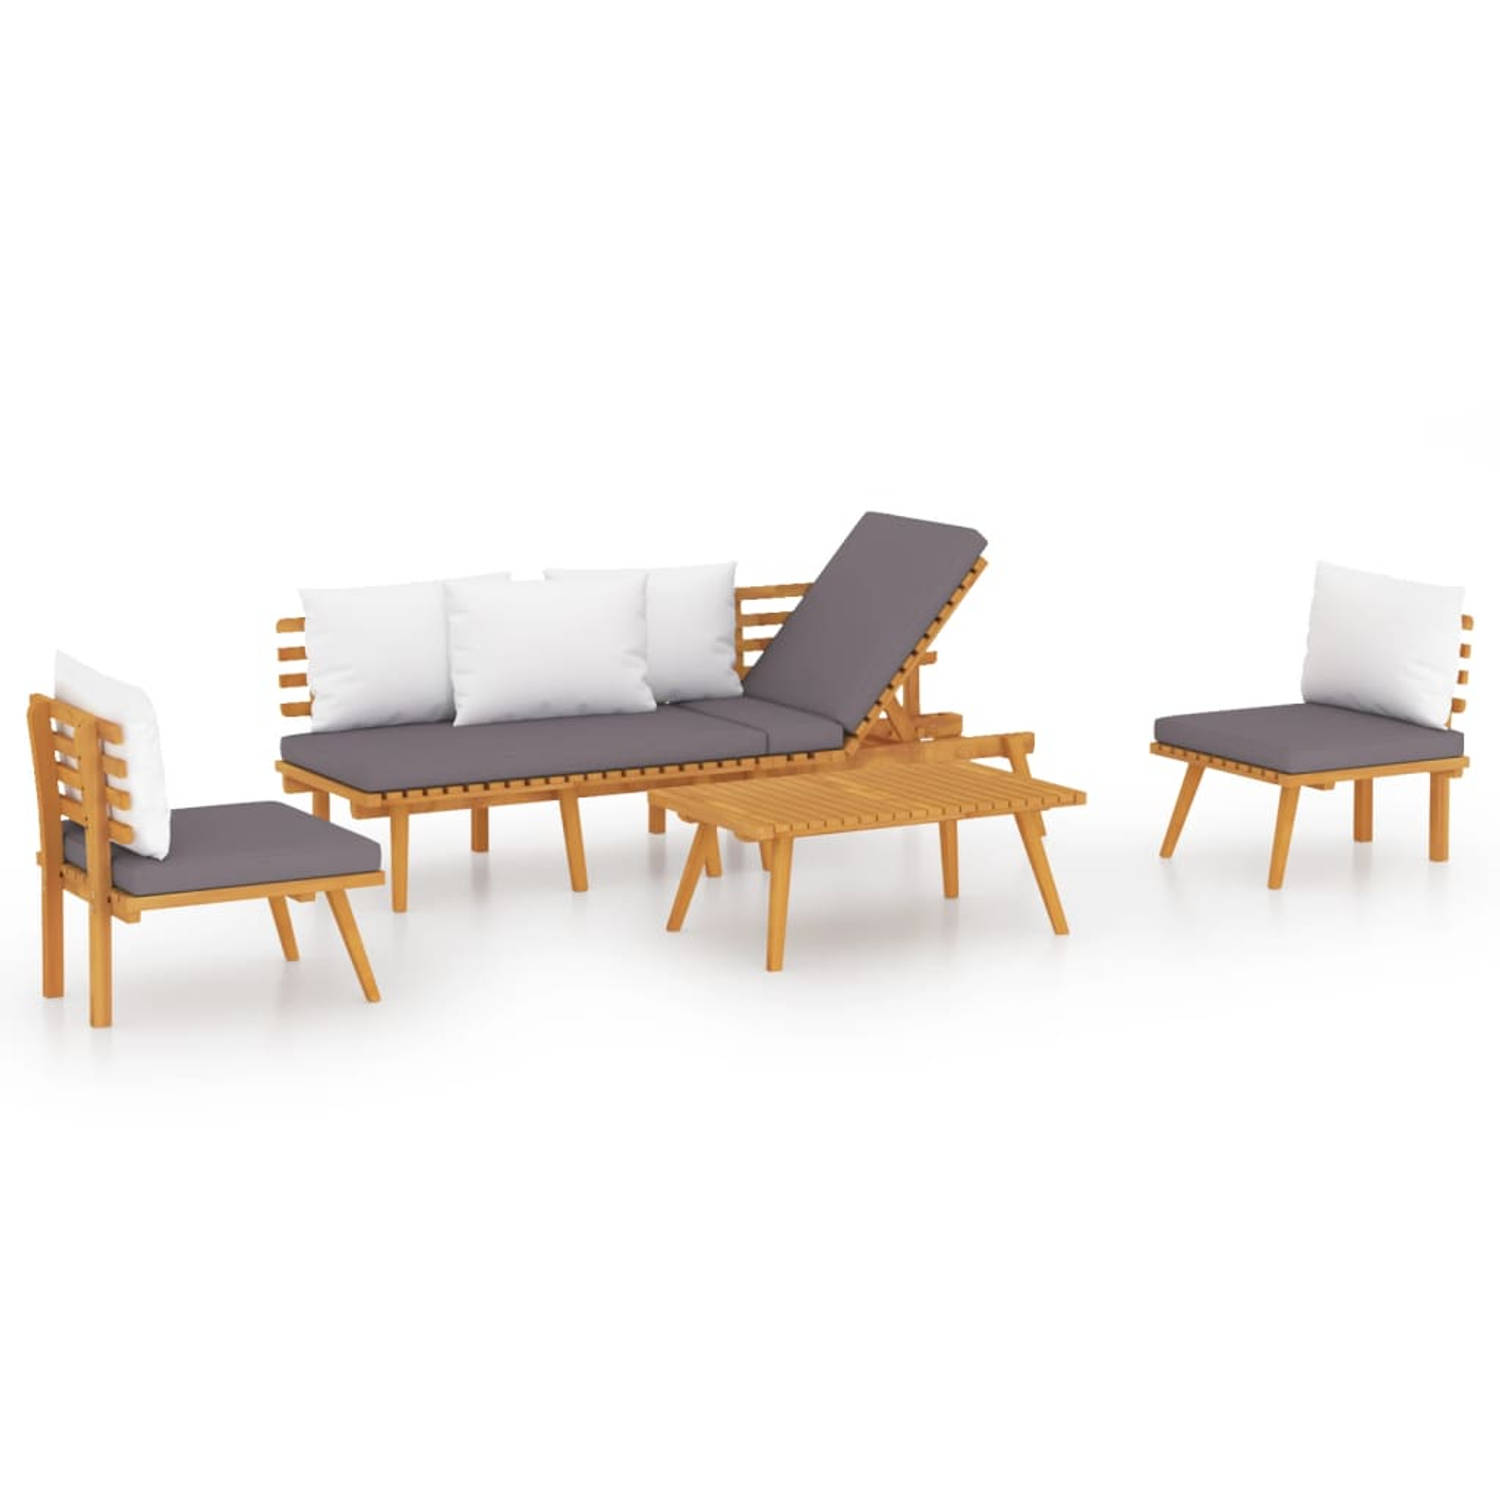 The Living Store 4-delige Loungeset met kussens massief acaciahout - Tuinset